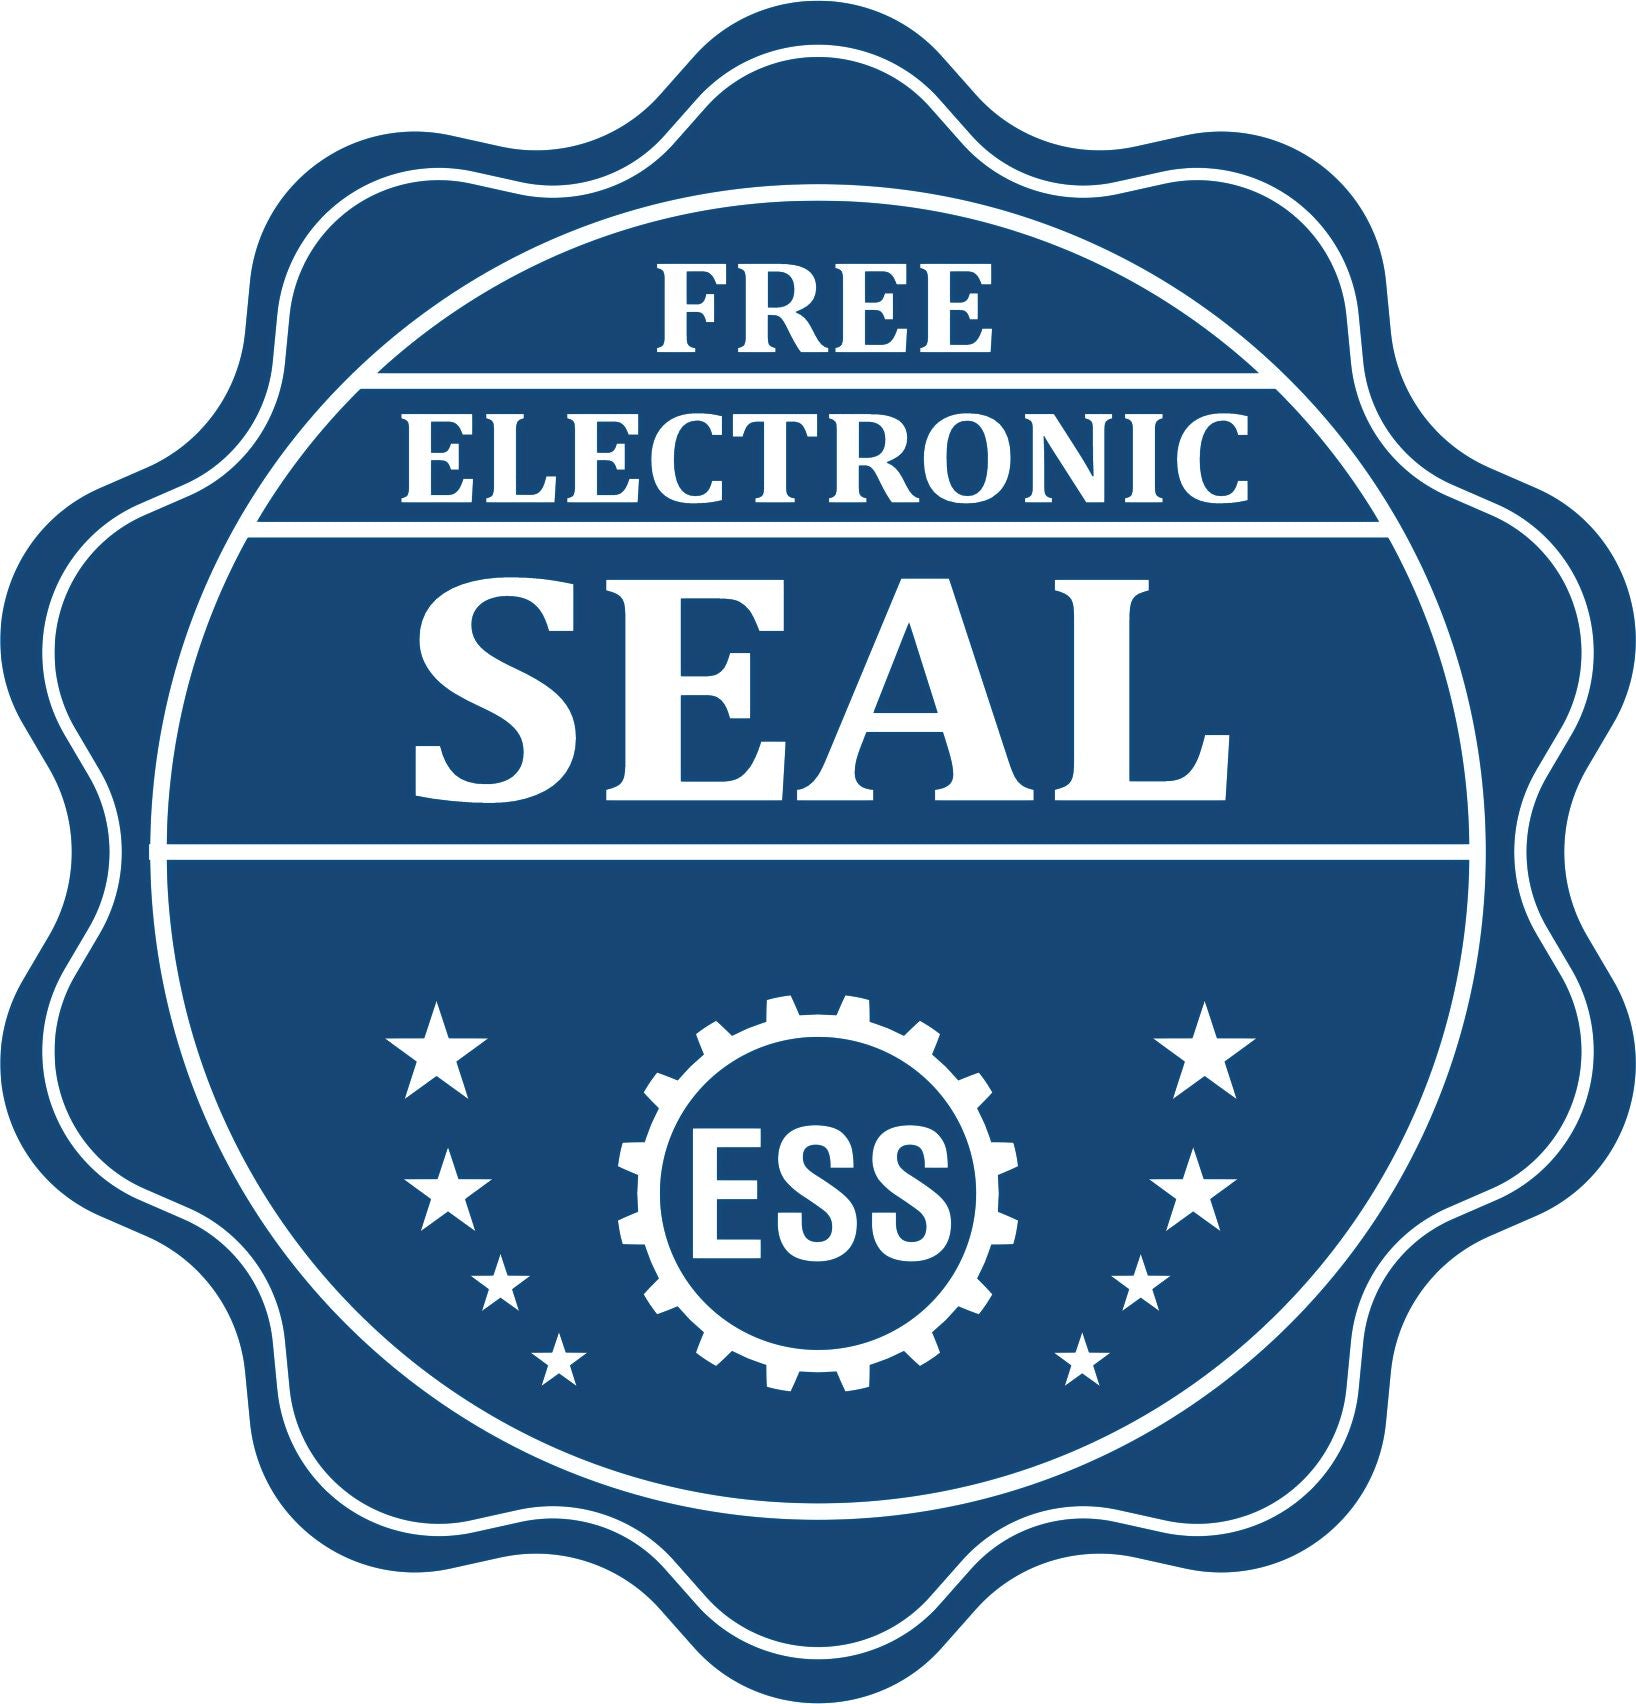 A badge showing a free electronic seal for the State of West Virginia Extended Long Reach Geologist Seal with stars and the ESS gear on the emblem.